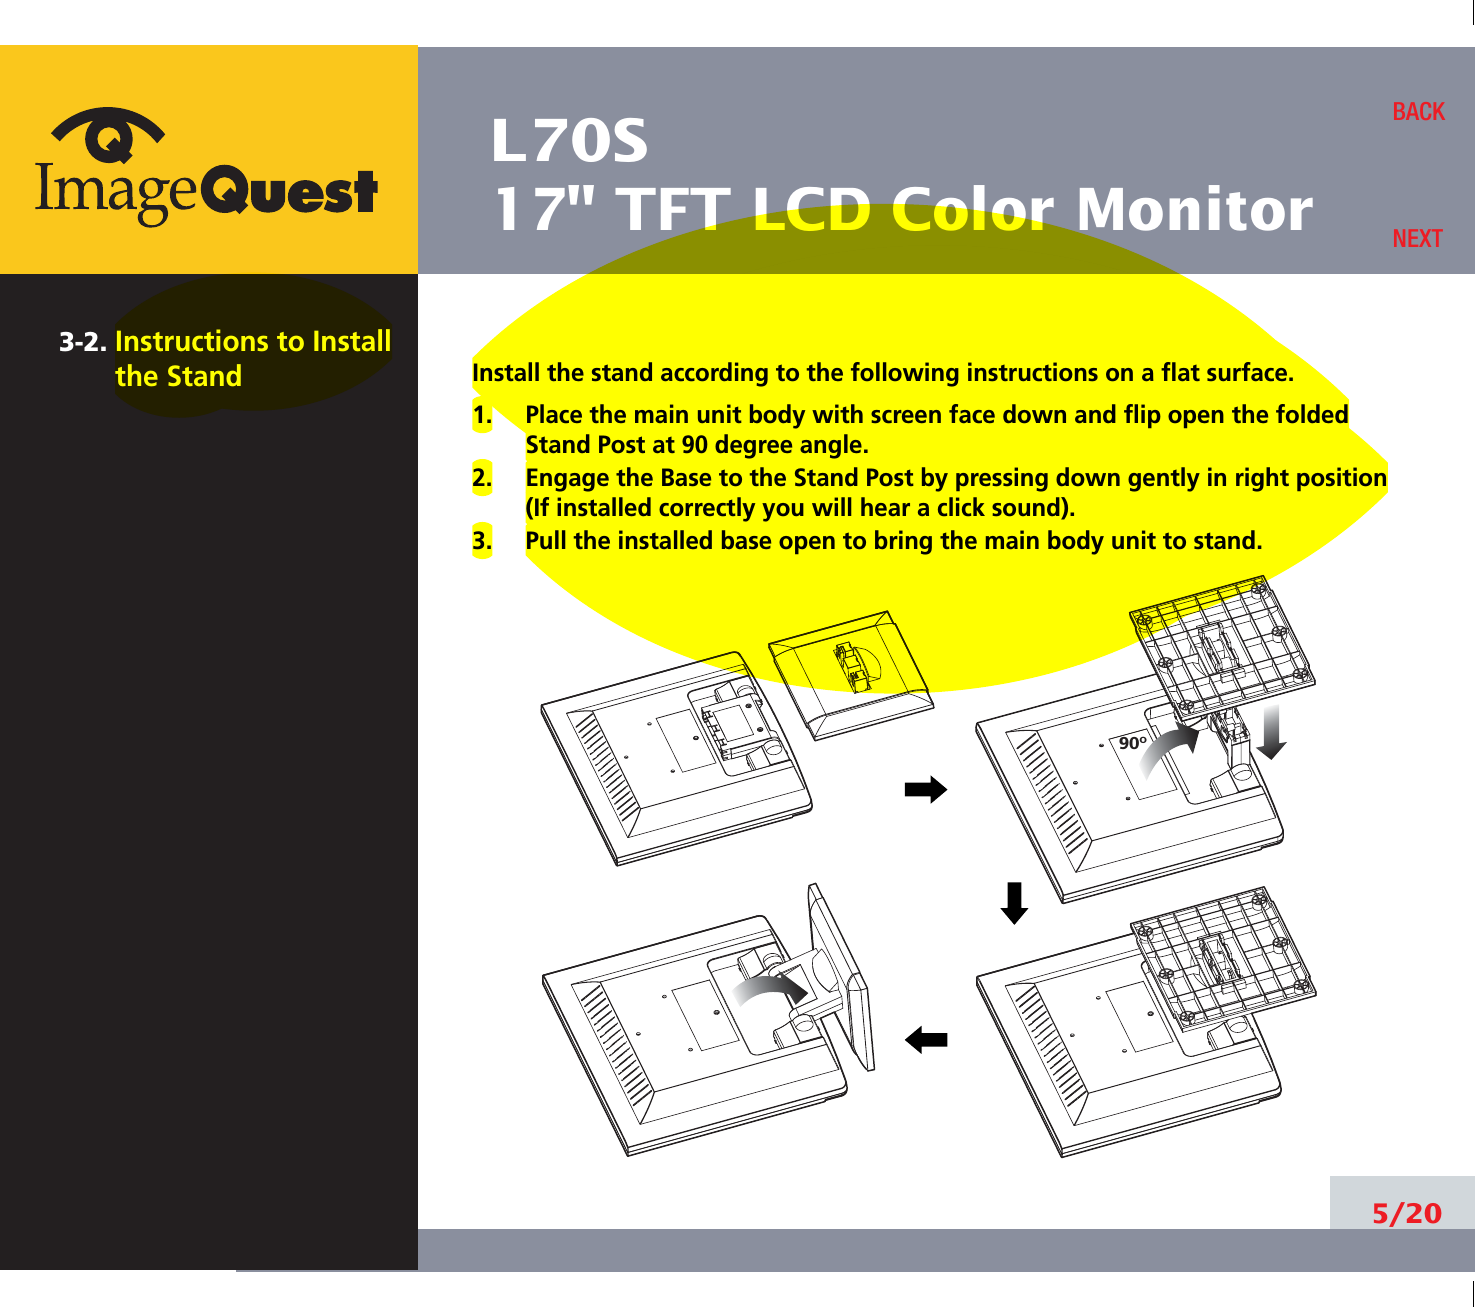 L70S17&quot; TFT LCD Color Monitor3-2. Instructions to Installthe Stand Install the stand according to the following instructions on a flat surface.1.     Place the main unit body with screen face down and flip open the foldedStand Post at 90 degree angle.2.     Engage the Base to the Stand Post by pressing down gently in right position(If installed correctly you will hear a click sound).3.     Pull the installed base open to bring the main body unit to stand.5/20BACKNEXT90O